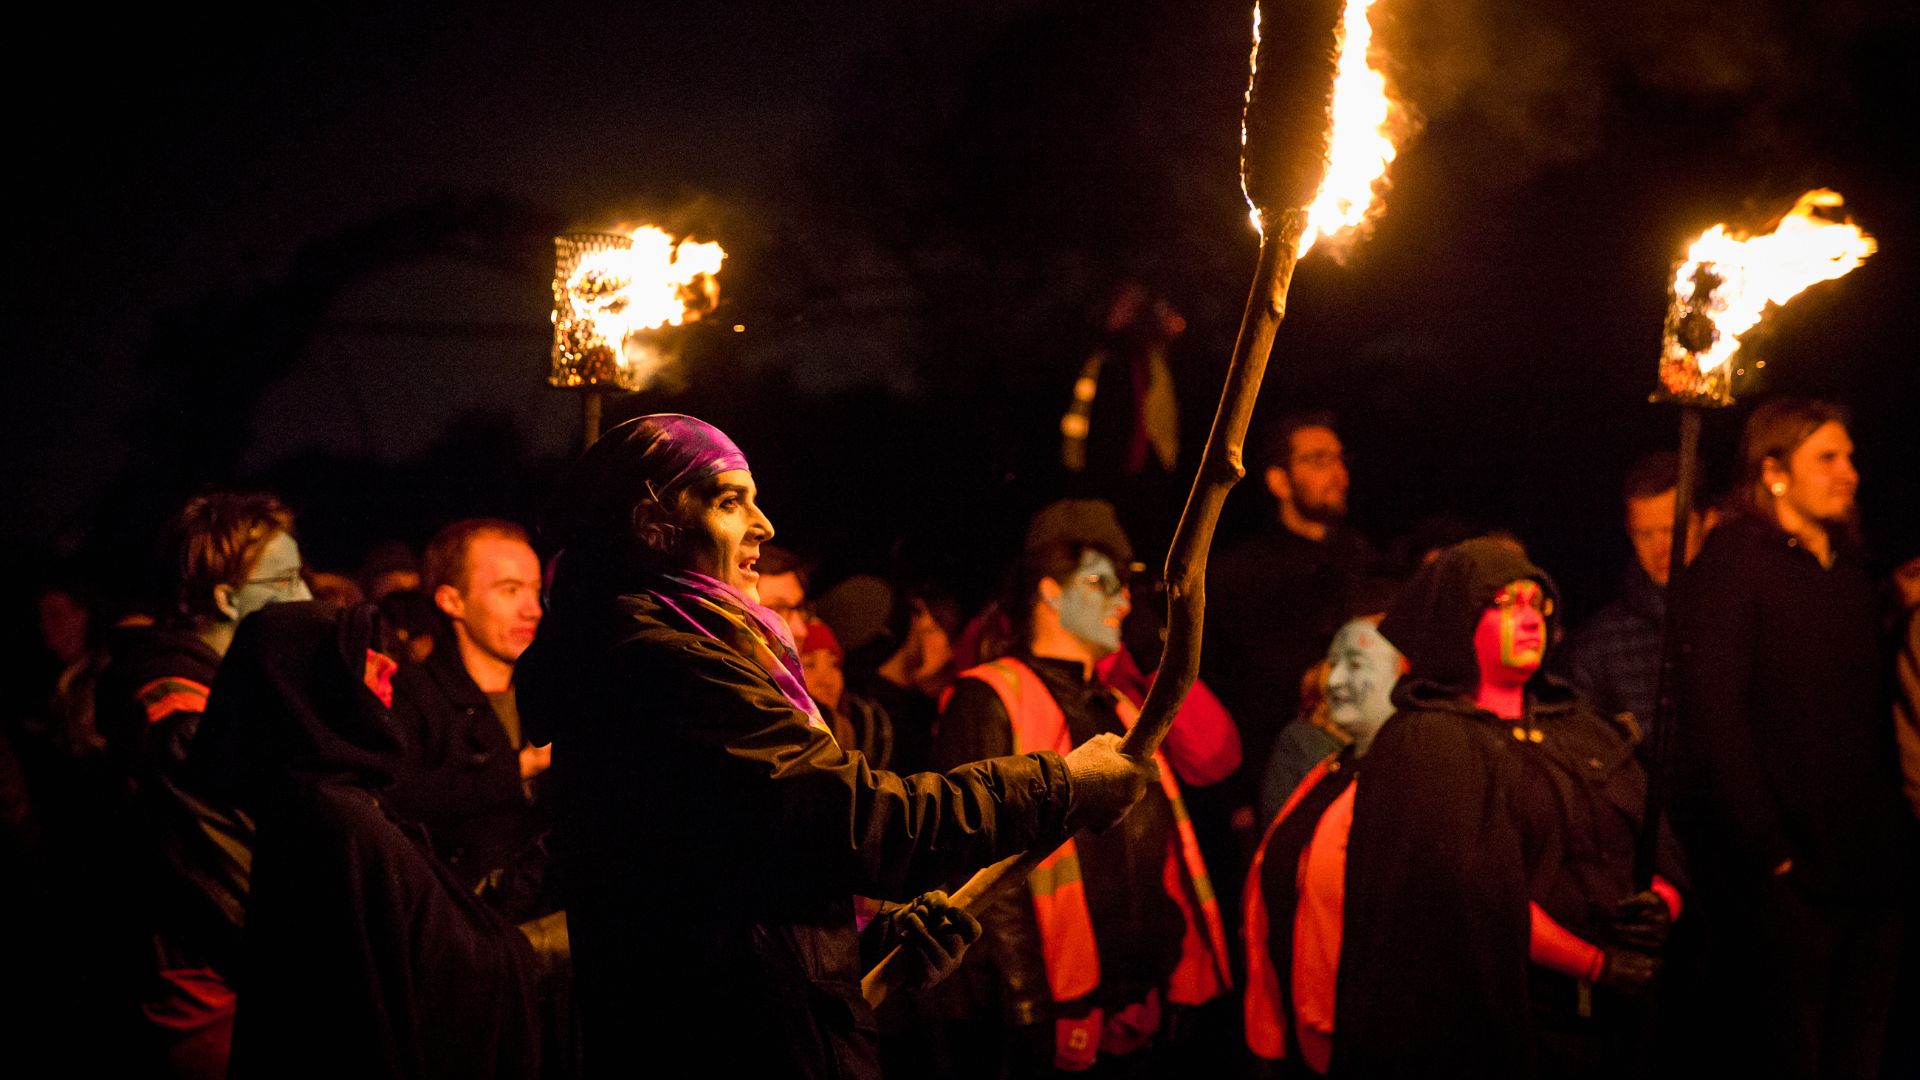 A group of people dressed in costumes and holding flaming torches while celebrating Halloween in Edinburgh.